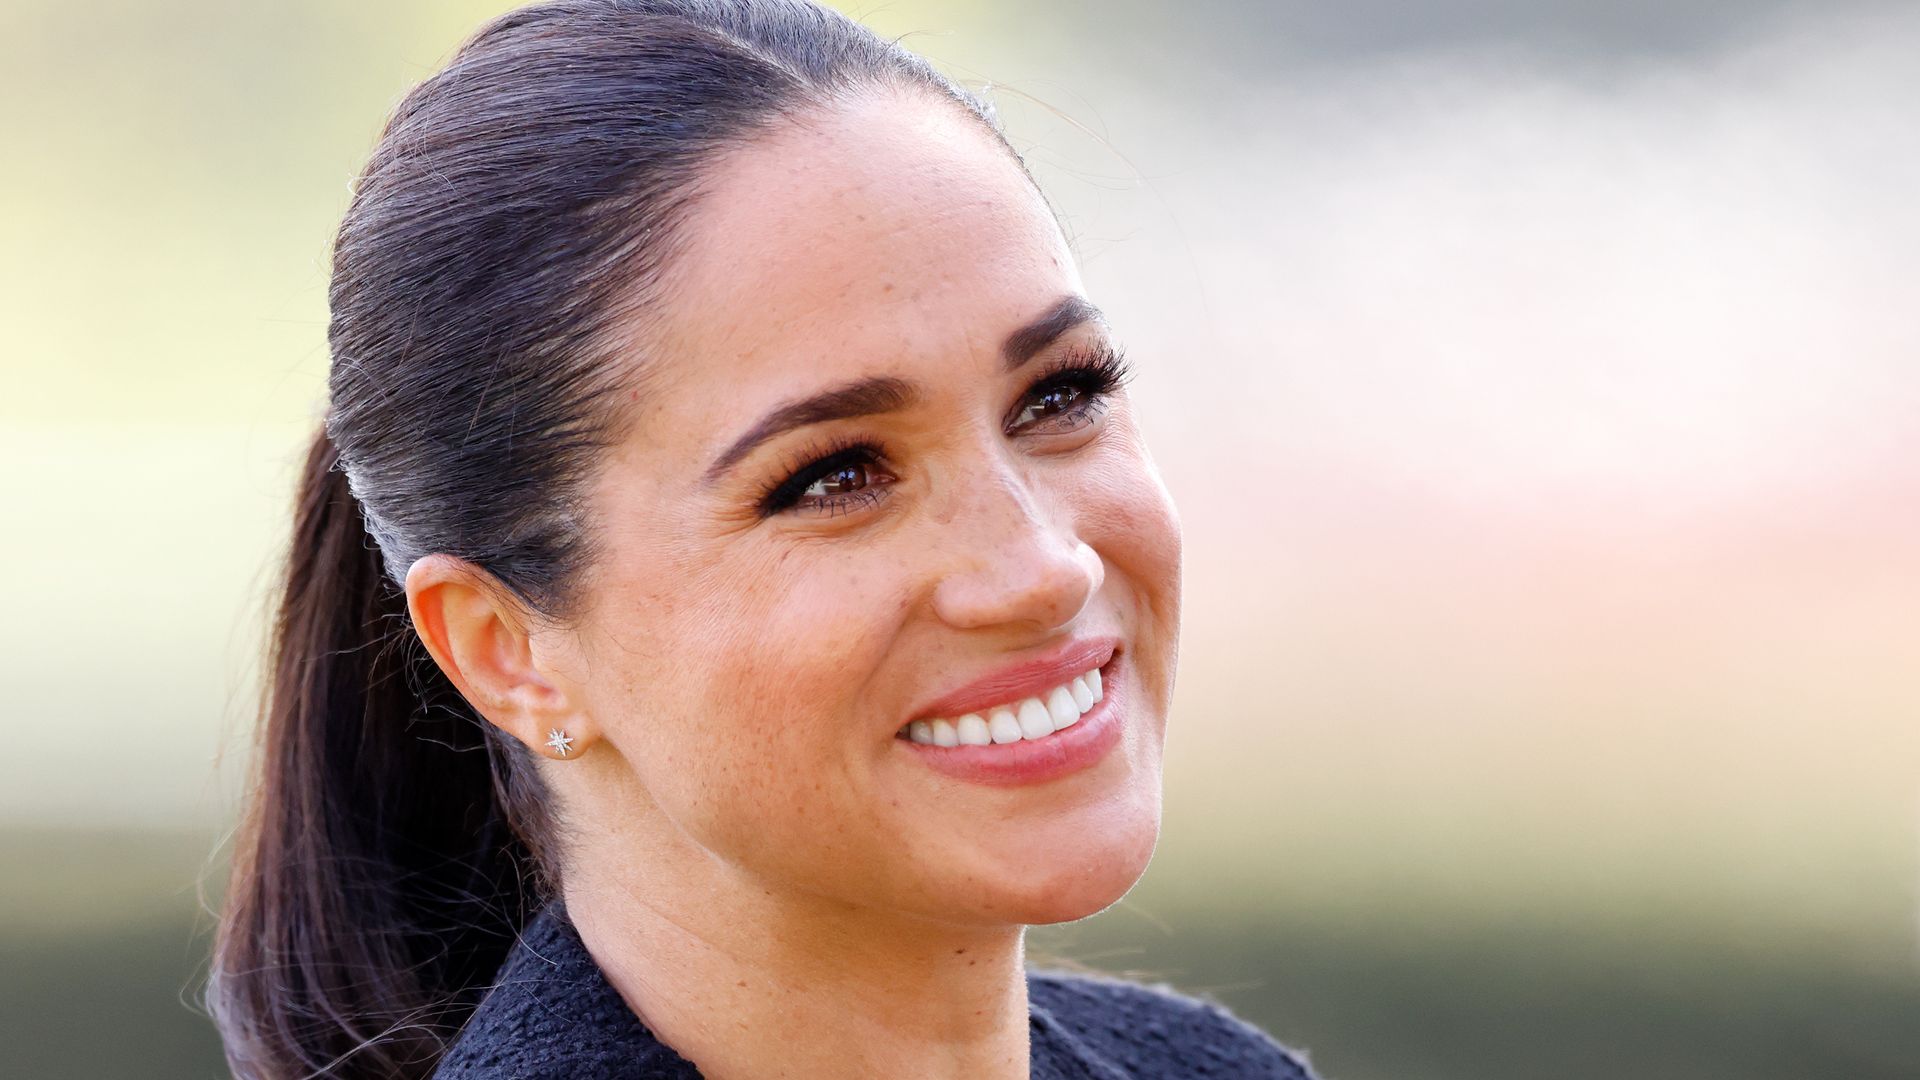 Meghan Markle with hair in ponytail smiling